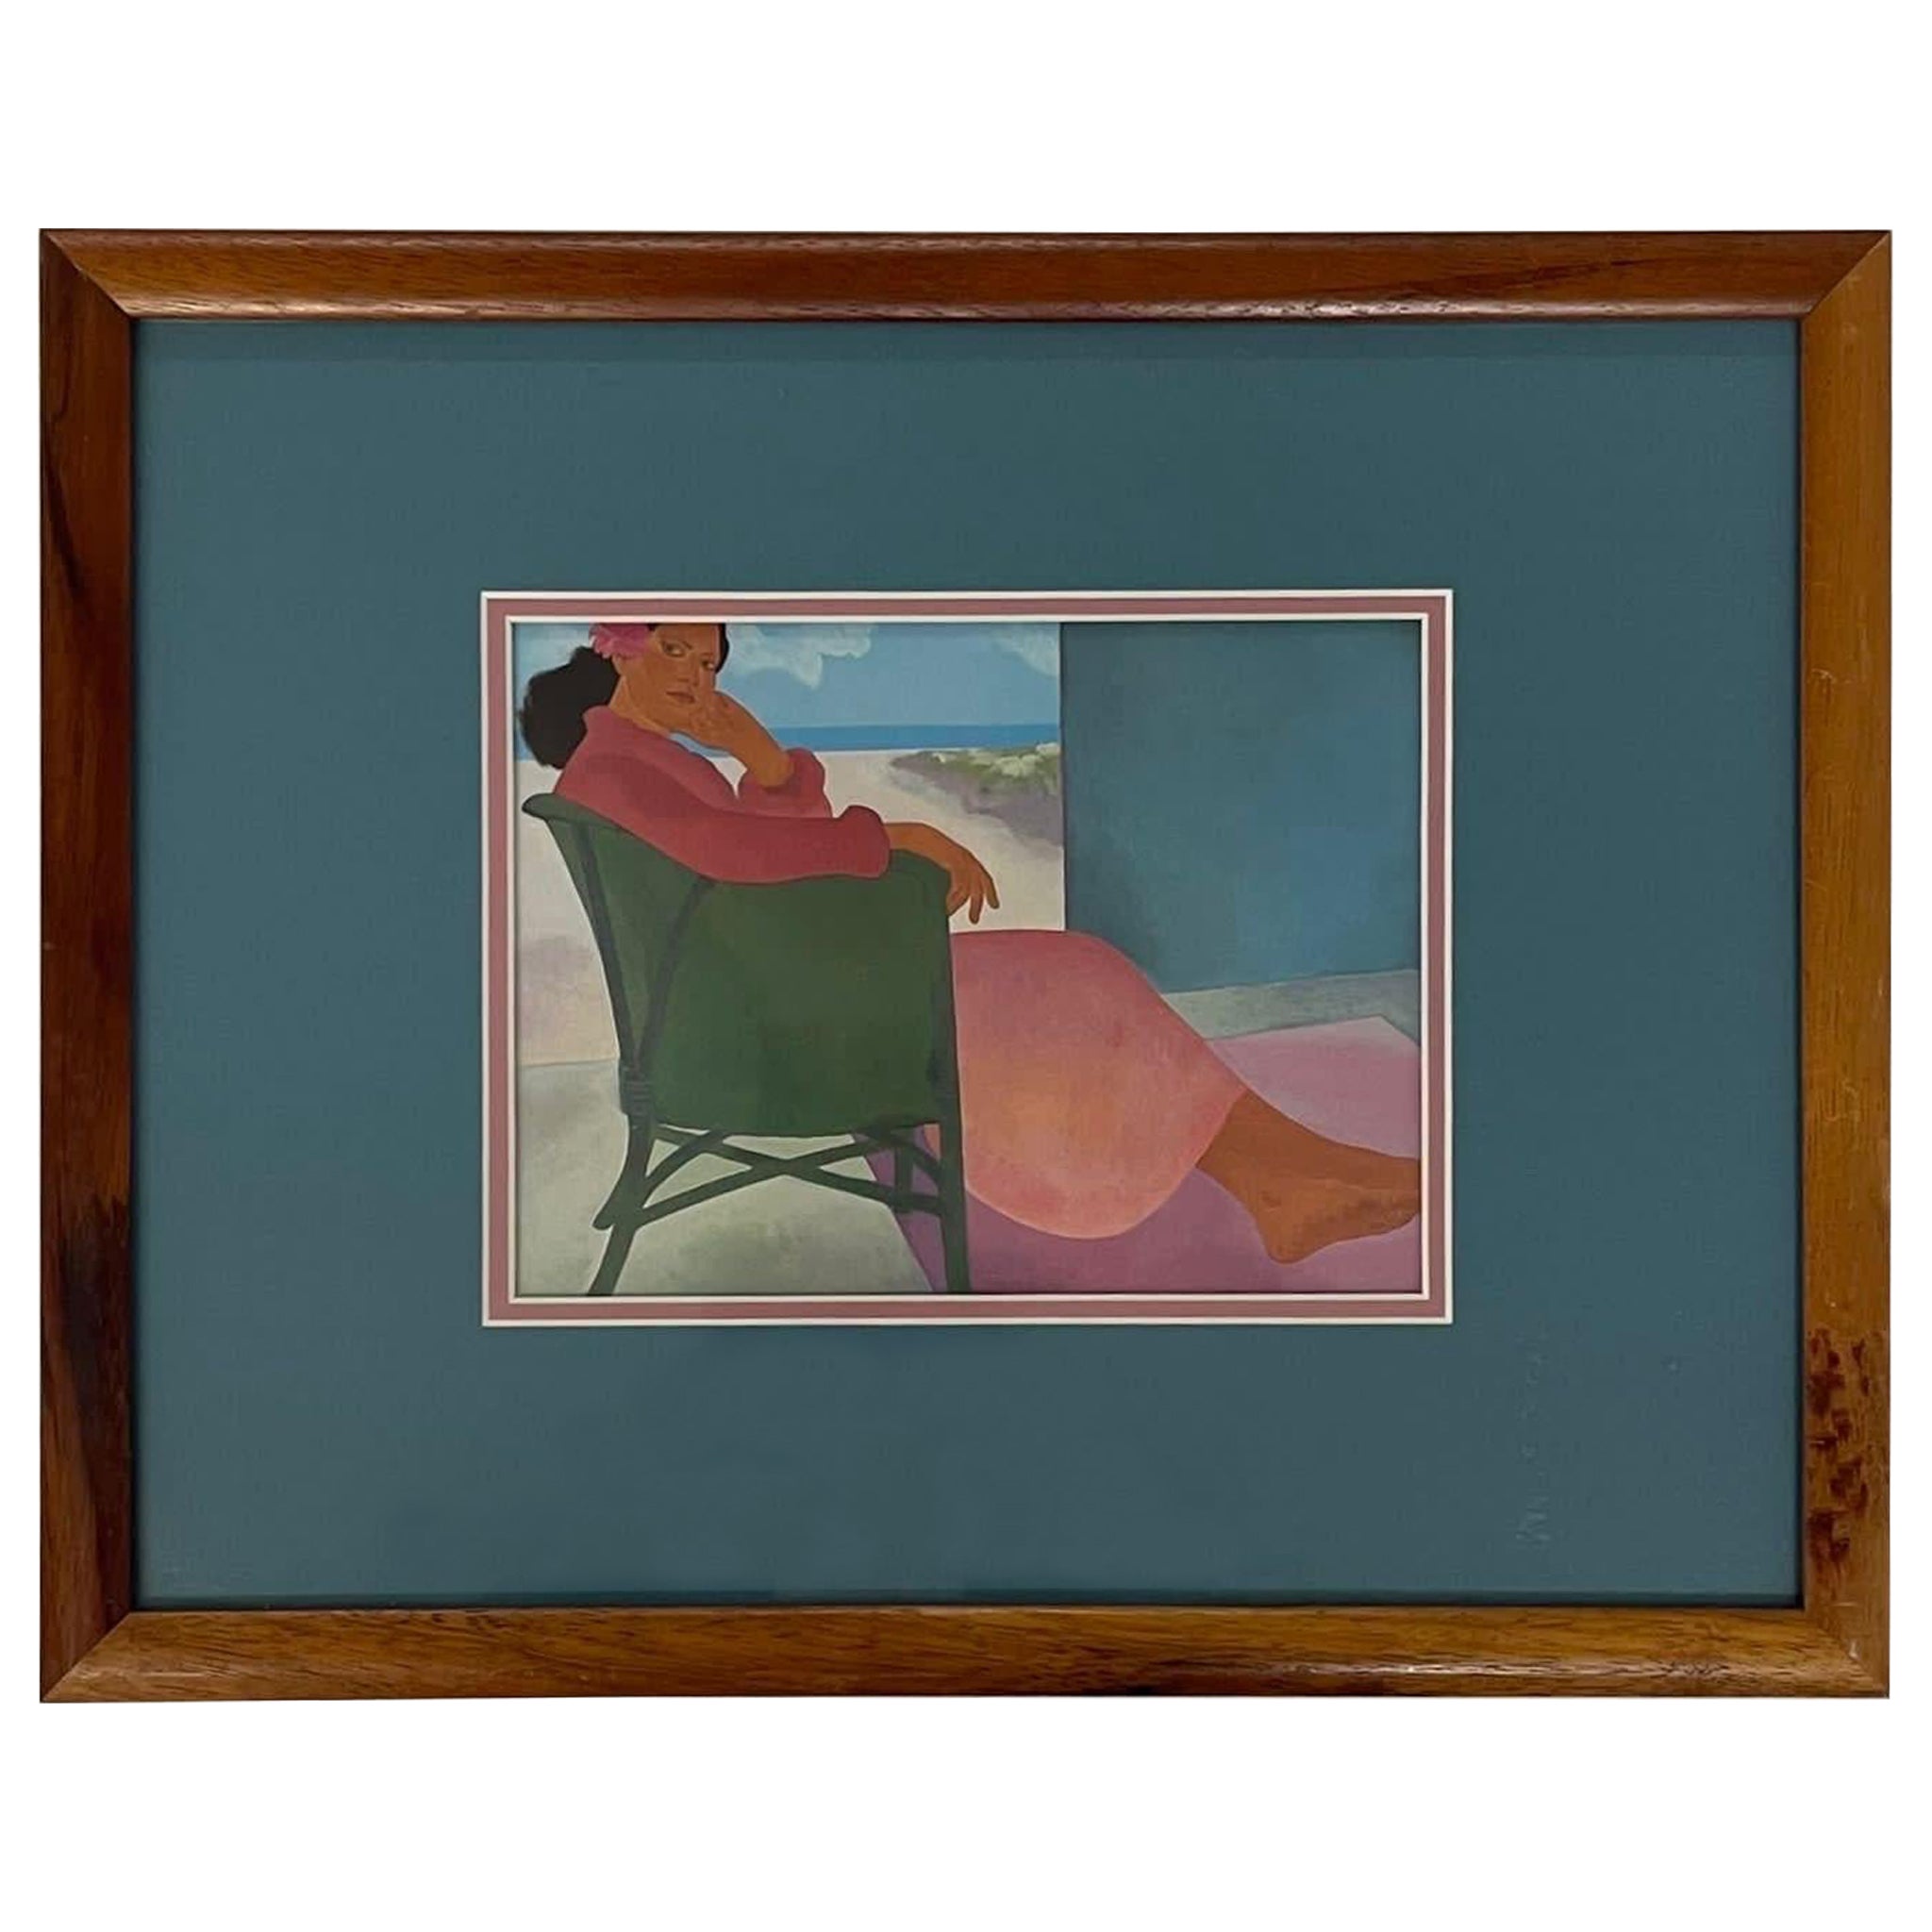 Vintage Wood Framed and Matted Print intitulé Woman in Chair de Peggy Hopper.